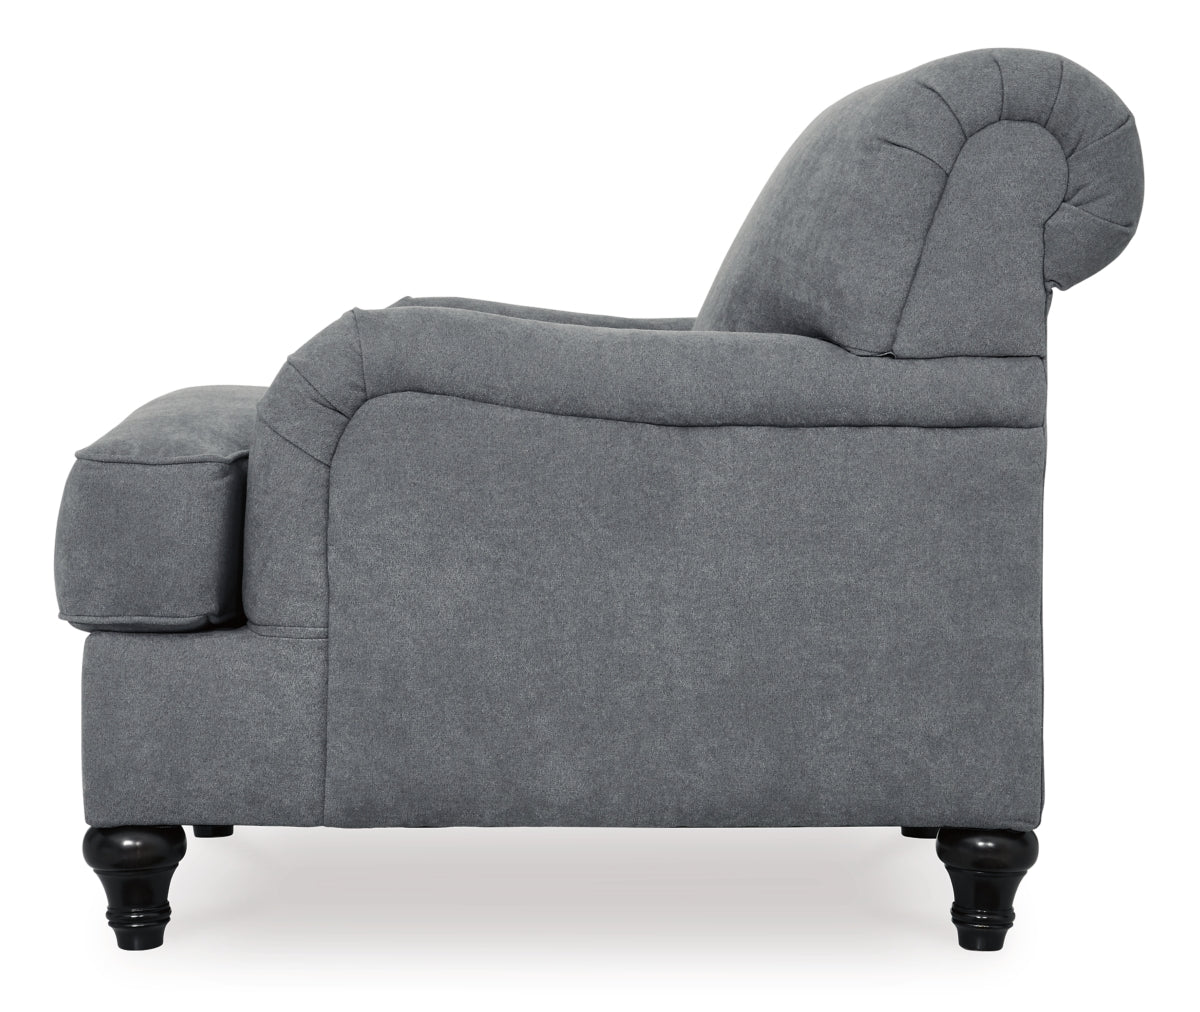 Renly Sofa, Loveseat and Chair - furniture place usa